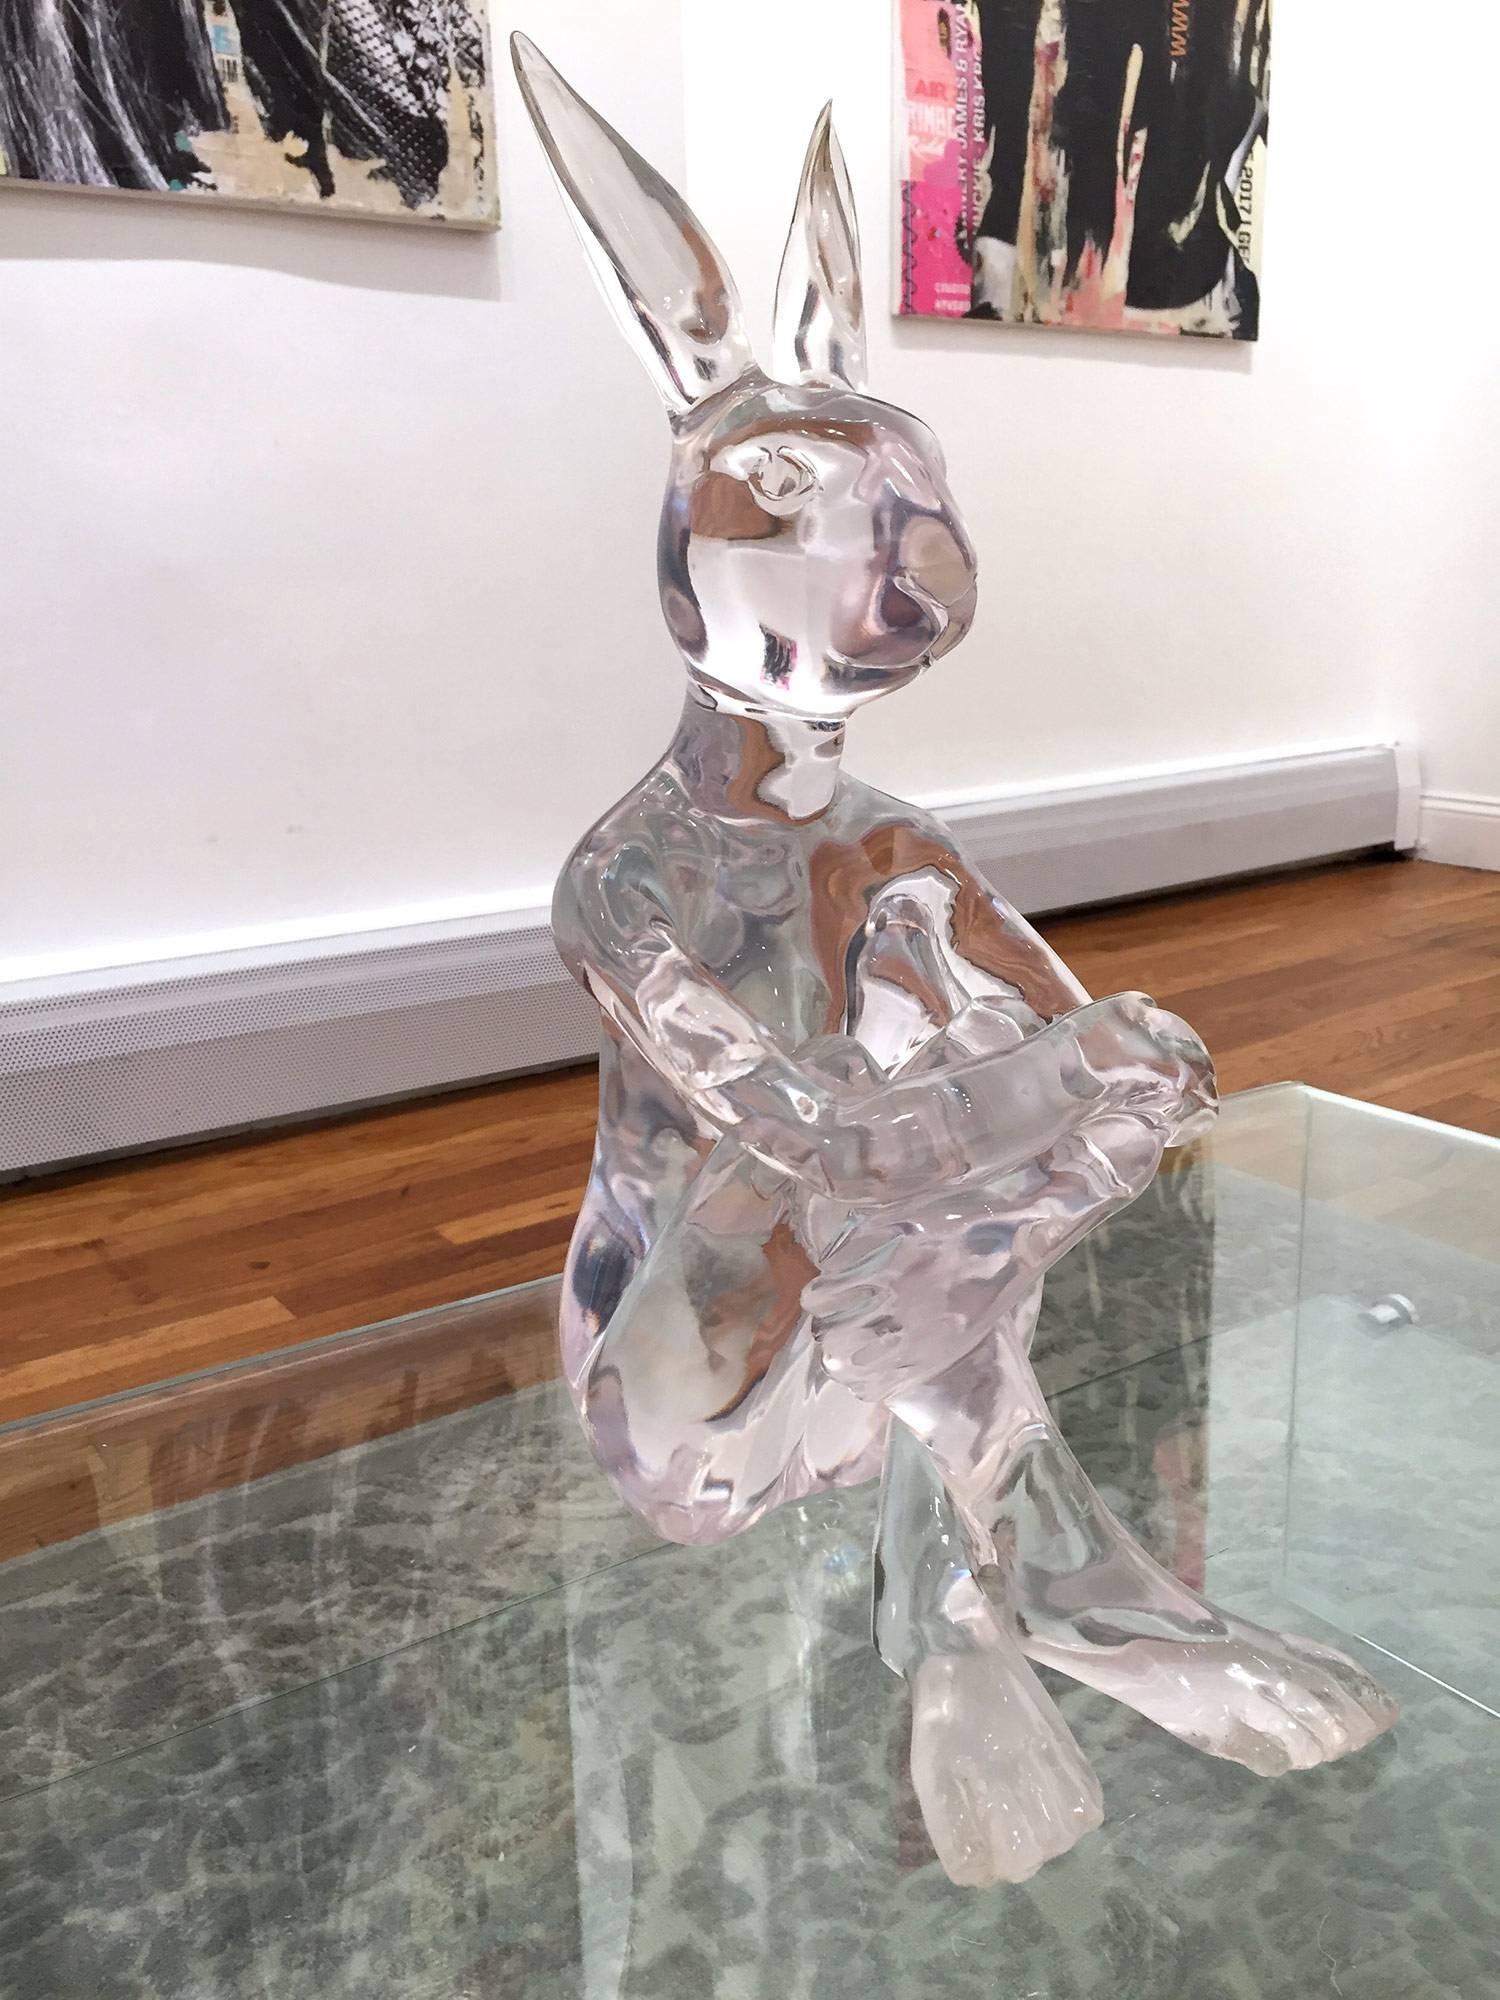 Lolly Rabbitgirl - Sculpture by Gillie and Marc Schattner